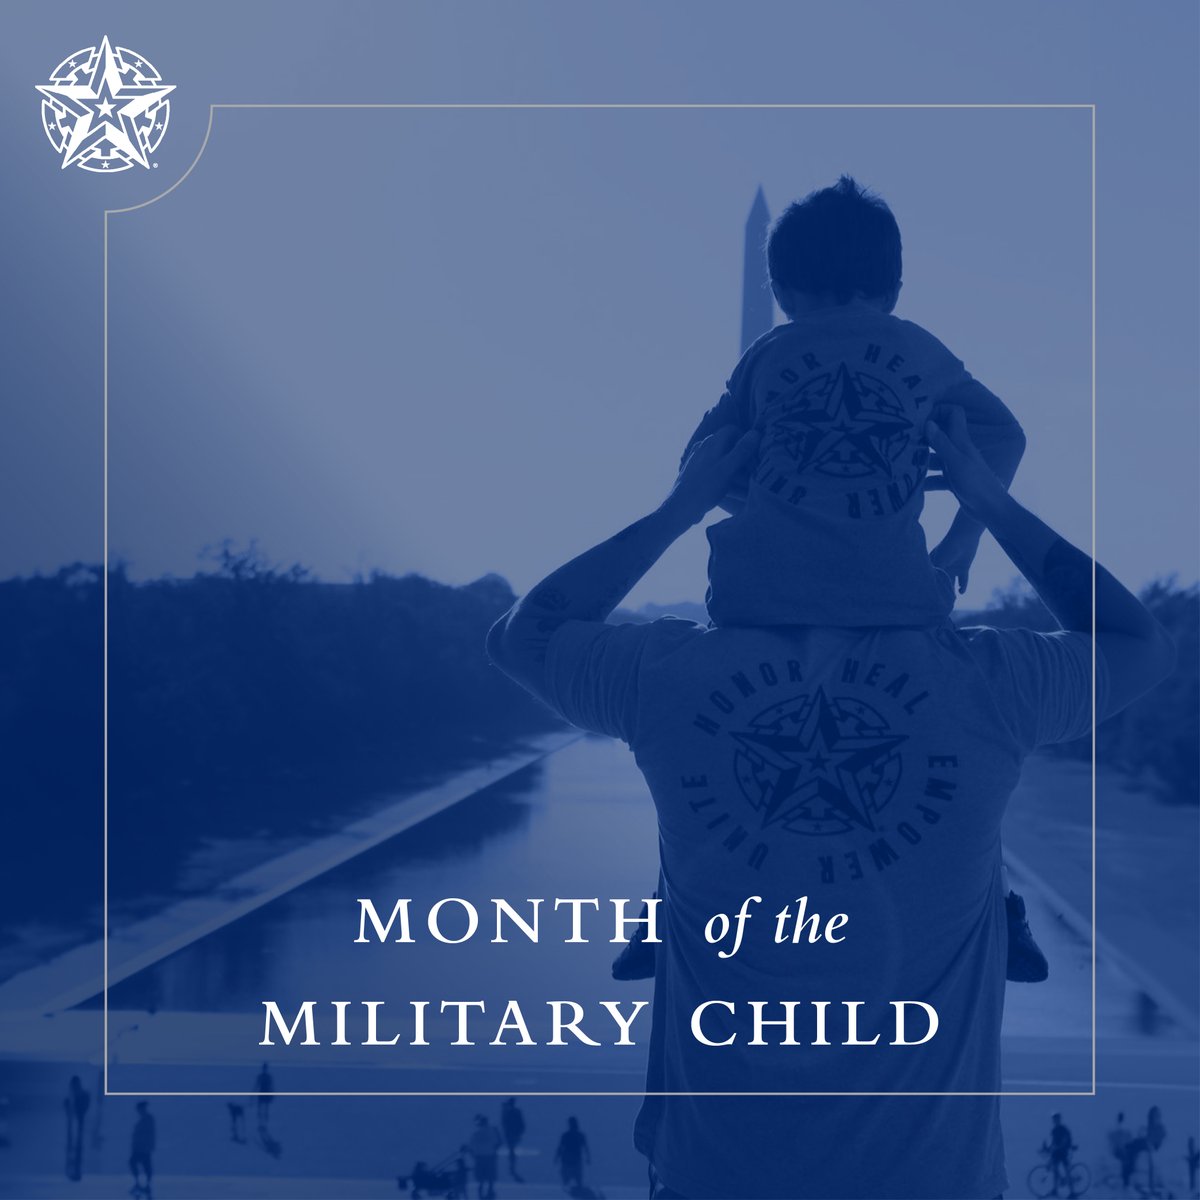 Today, we kick off the #MonthOfTheMilitaryChild! We are honored to build a Memorial that pays tribute to to all who served in the GWOT, as well as those who supported them. We are amazed by the strength and resilience of military children & we recognize their service & sacrifice.